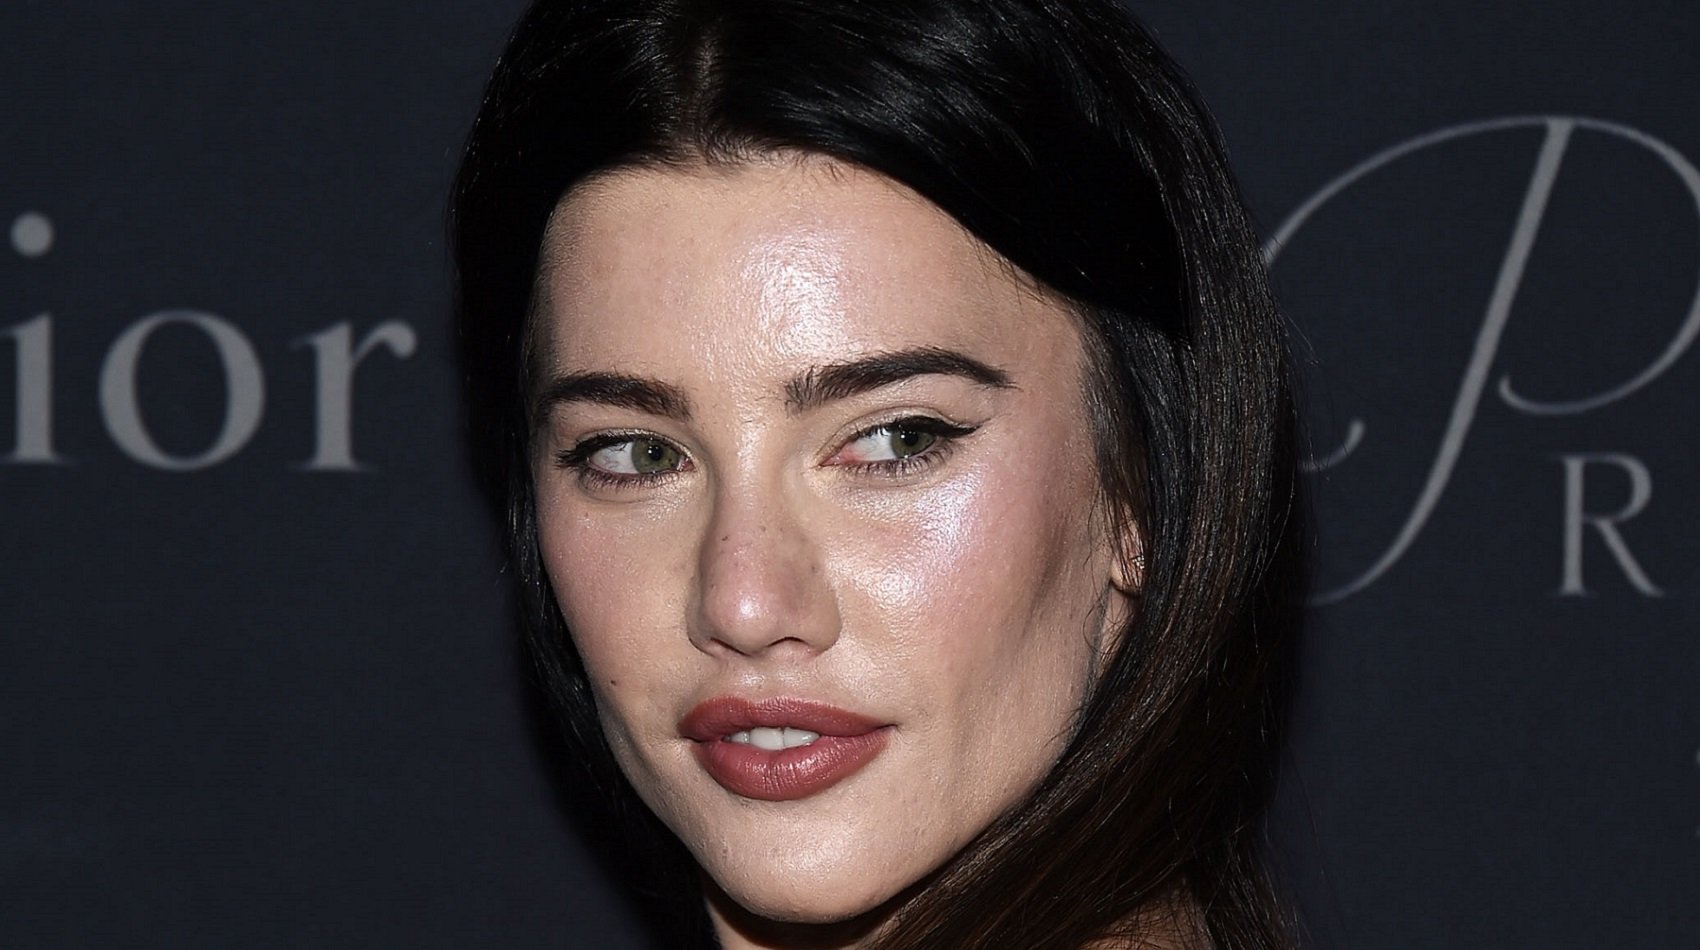 The Bold and the Beautiful speculation focuses on Steffy Forrester, played by Jacqueline MacInness Wood, pictured here